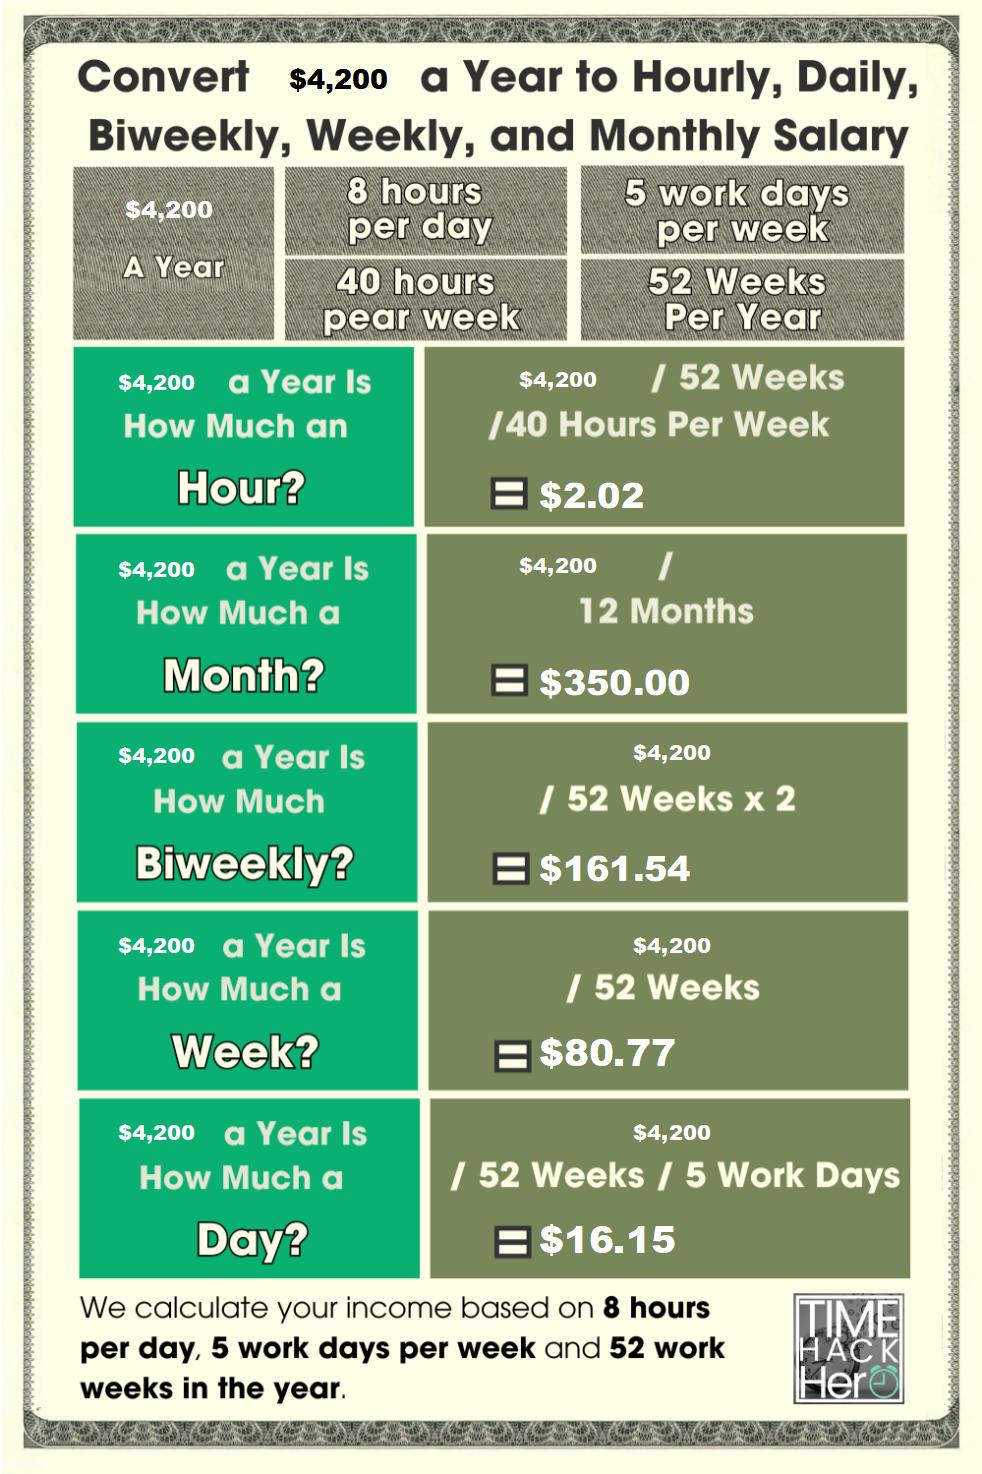 Convert $4200 a Year to Hourly, Daily, Biweekly, Weekly, and Monthly Salary